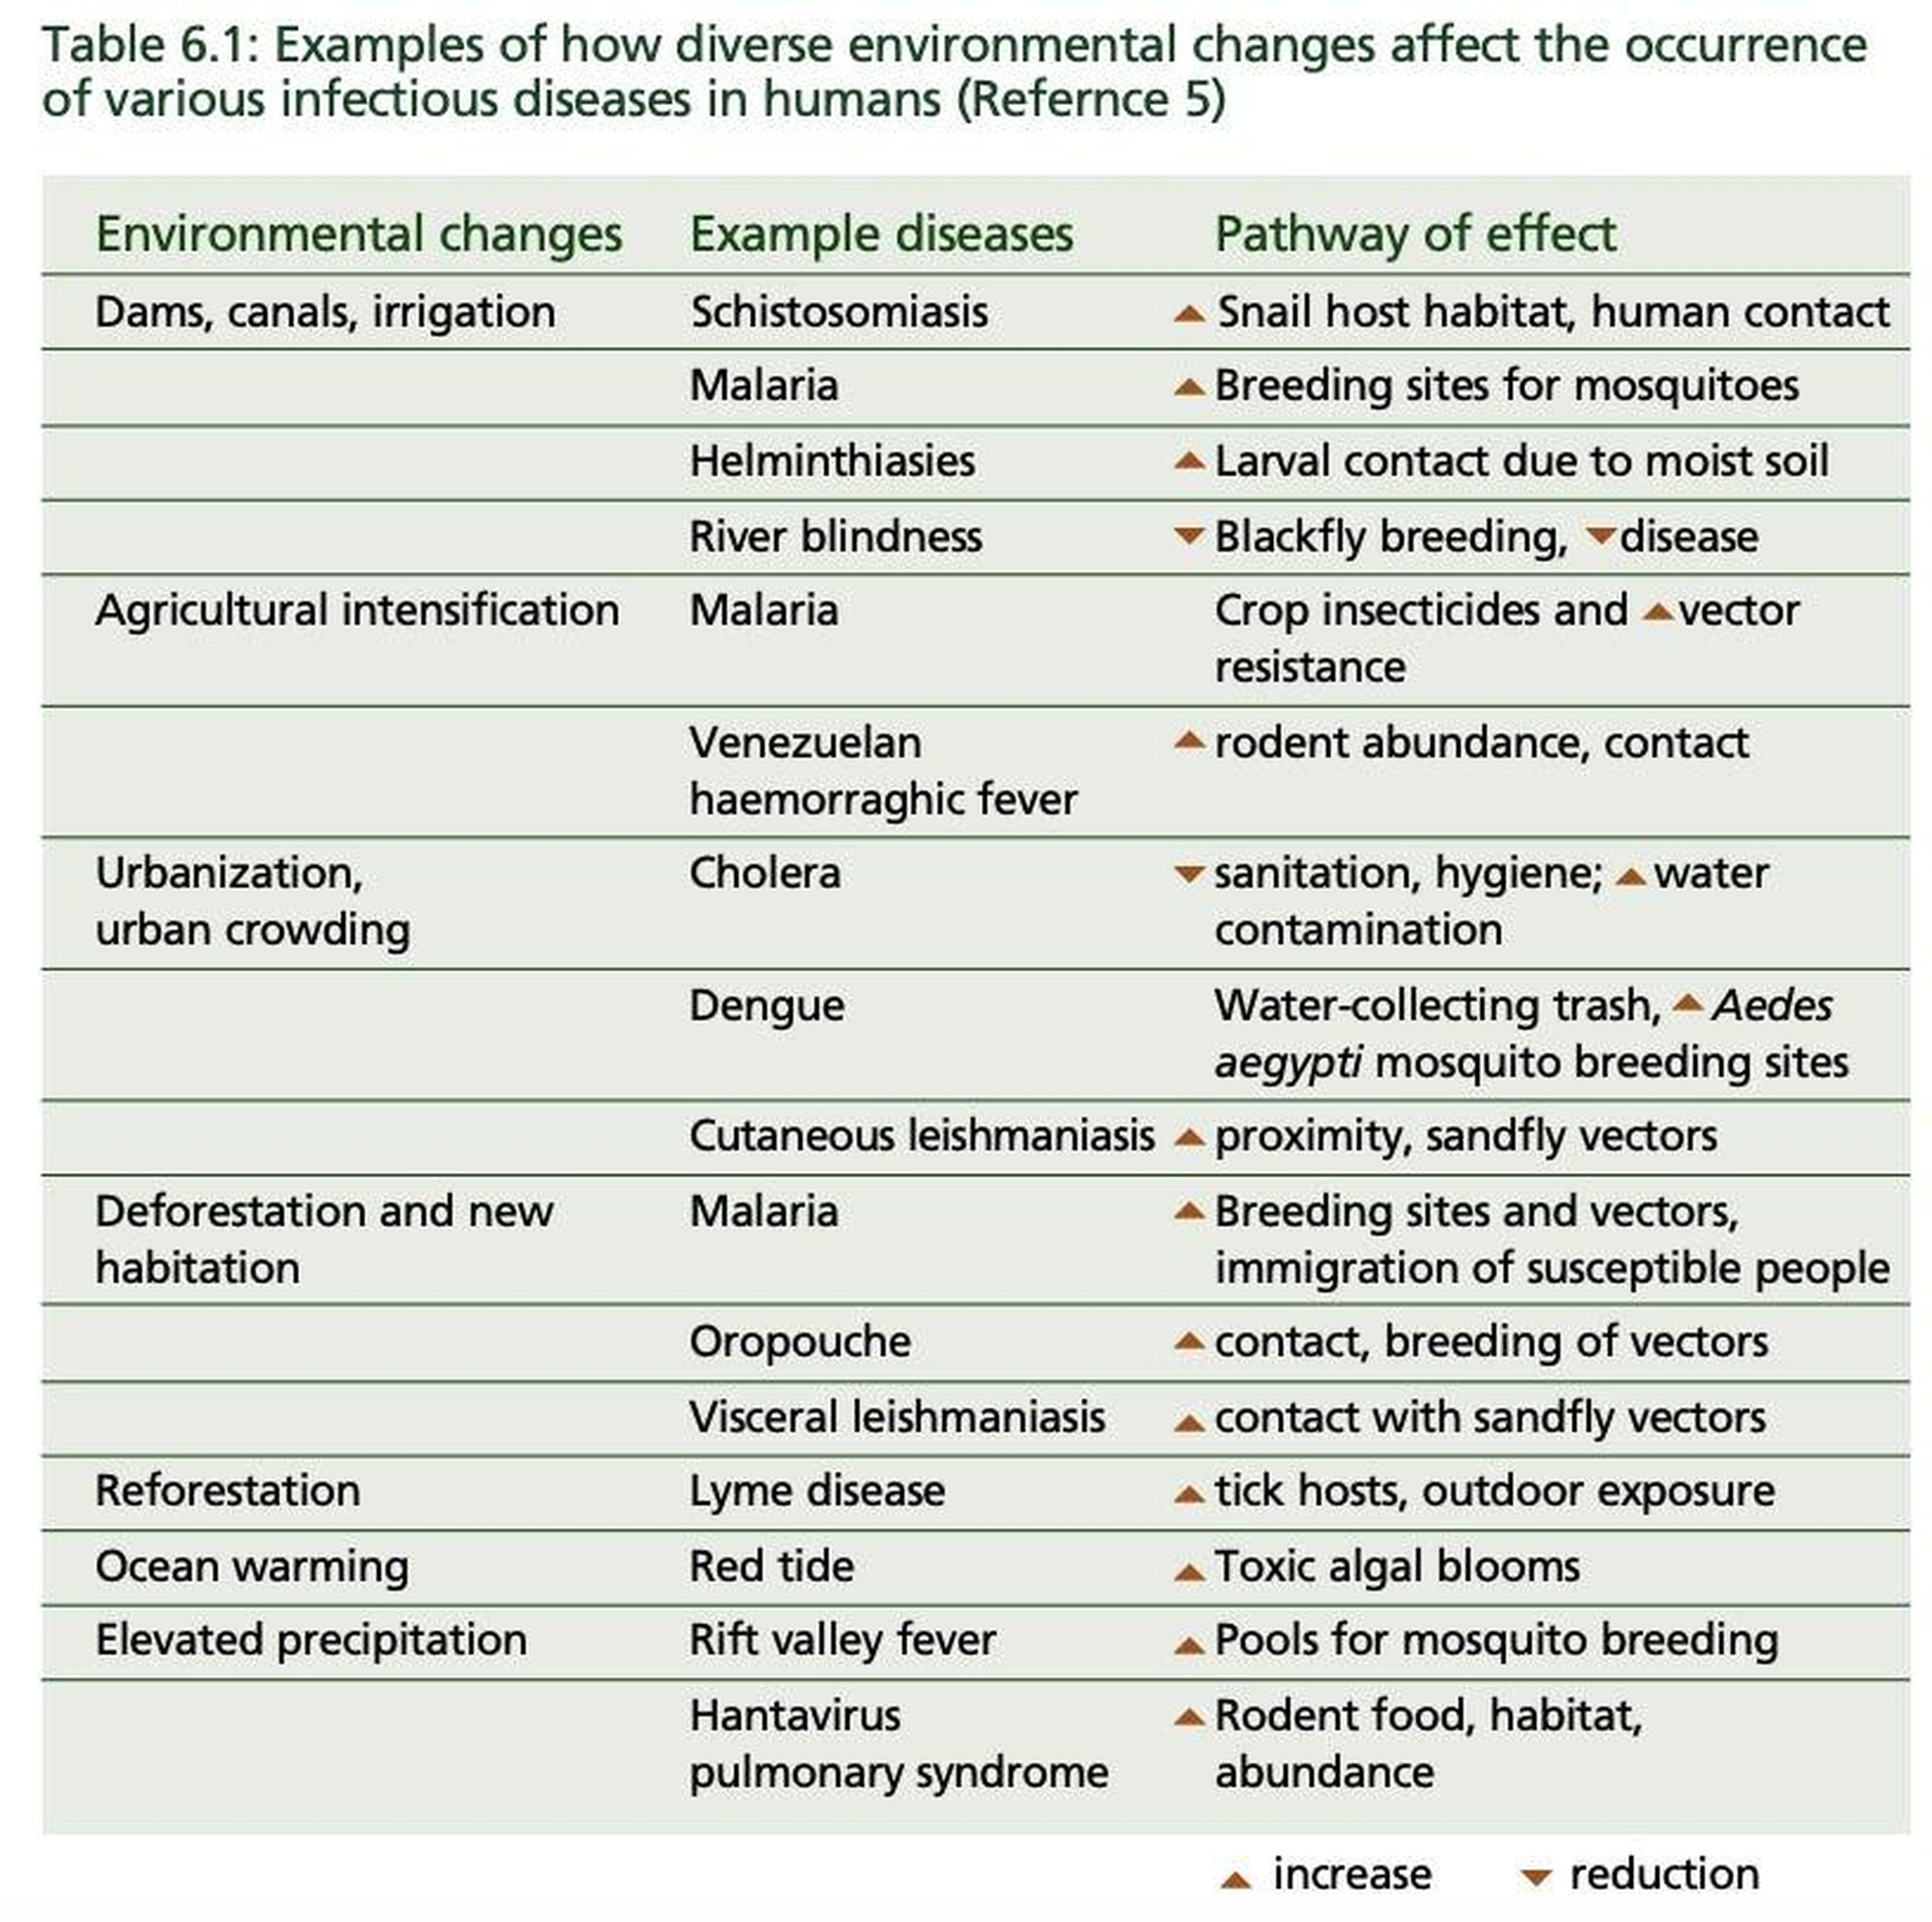 Examples of how climate change could affect the spread of infectious disease.